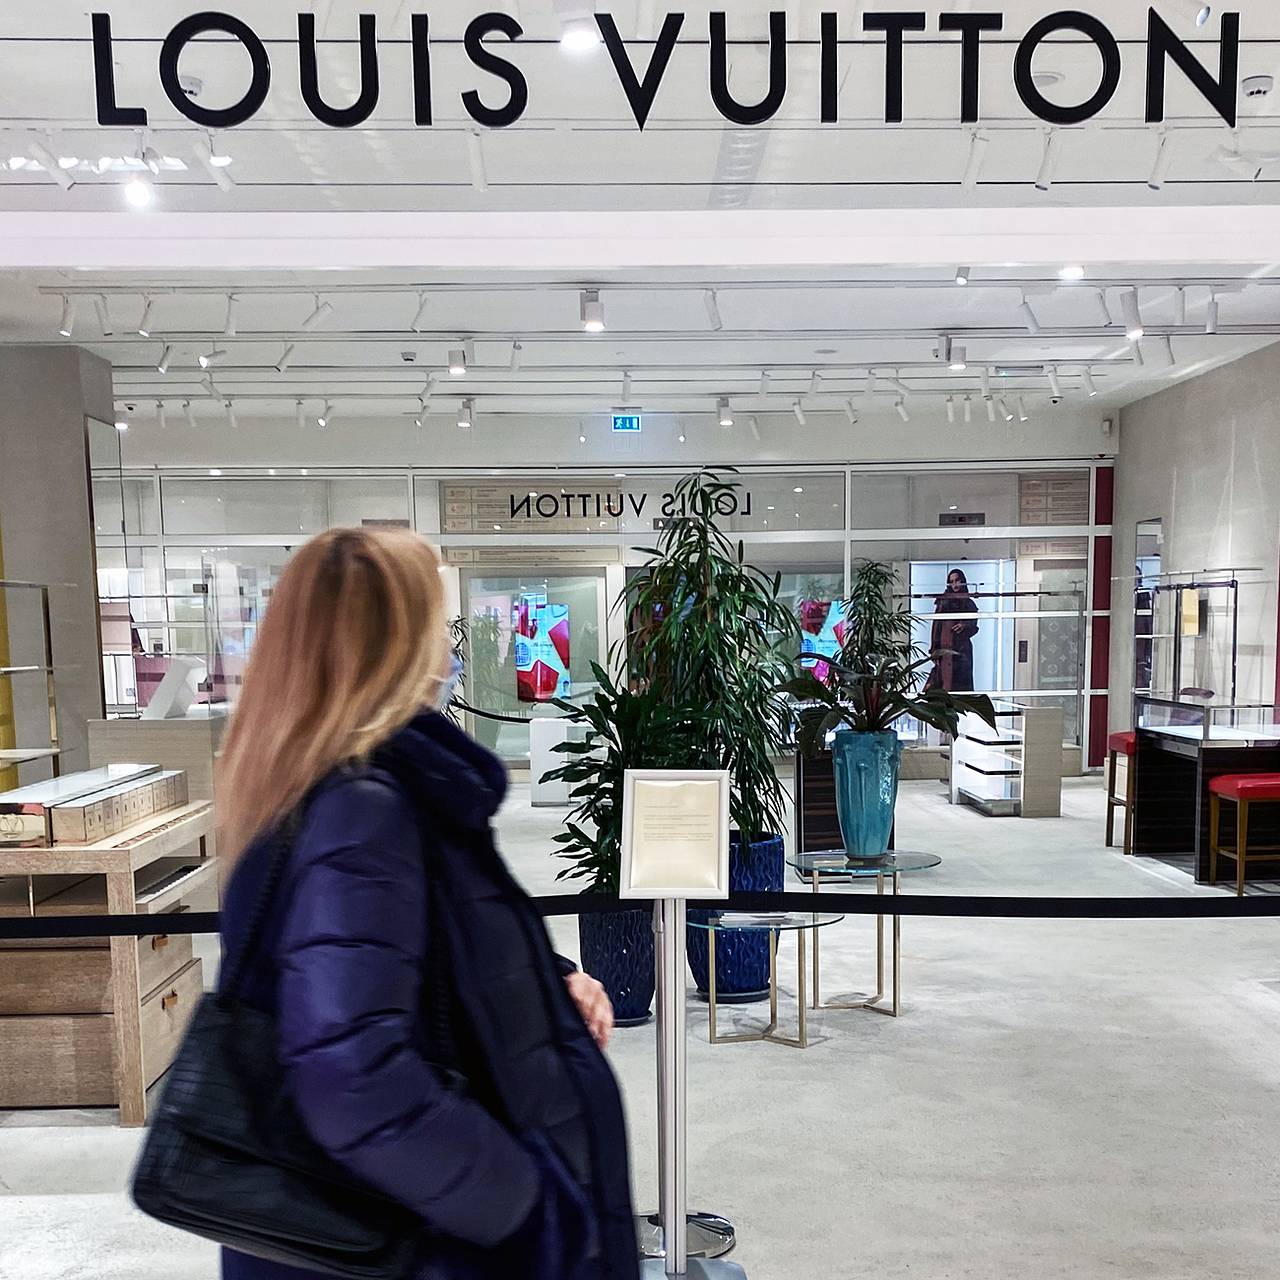 Lenox Mall Louis Vuitton Store Looting